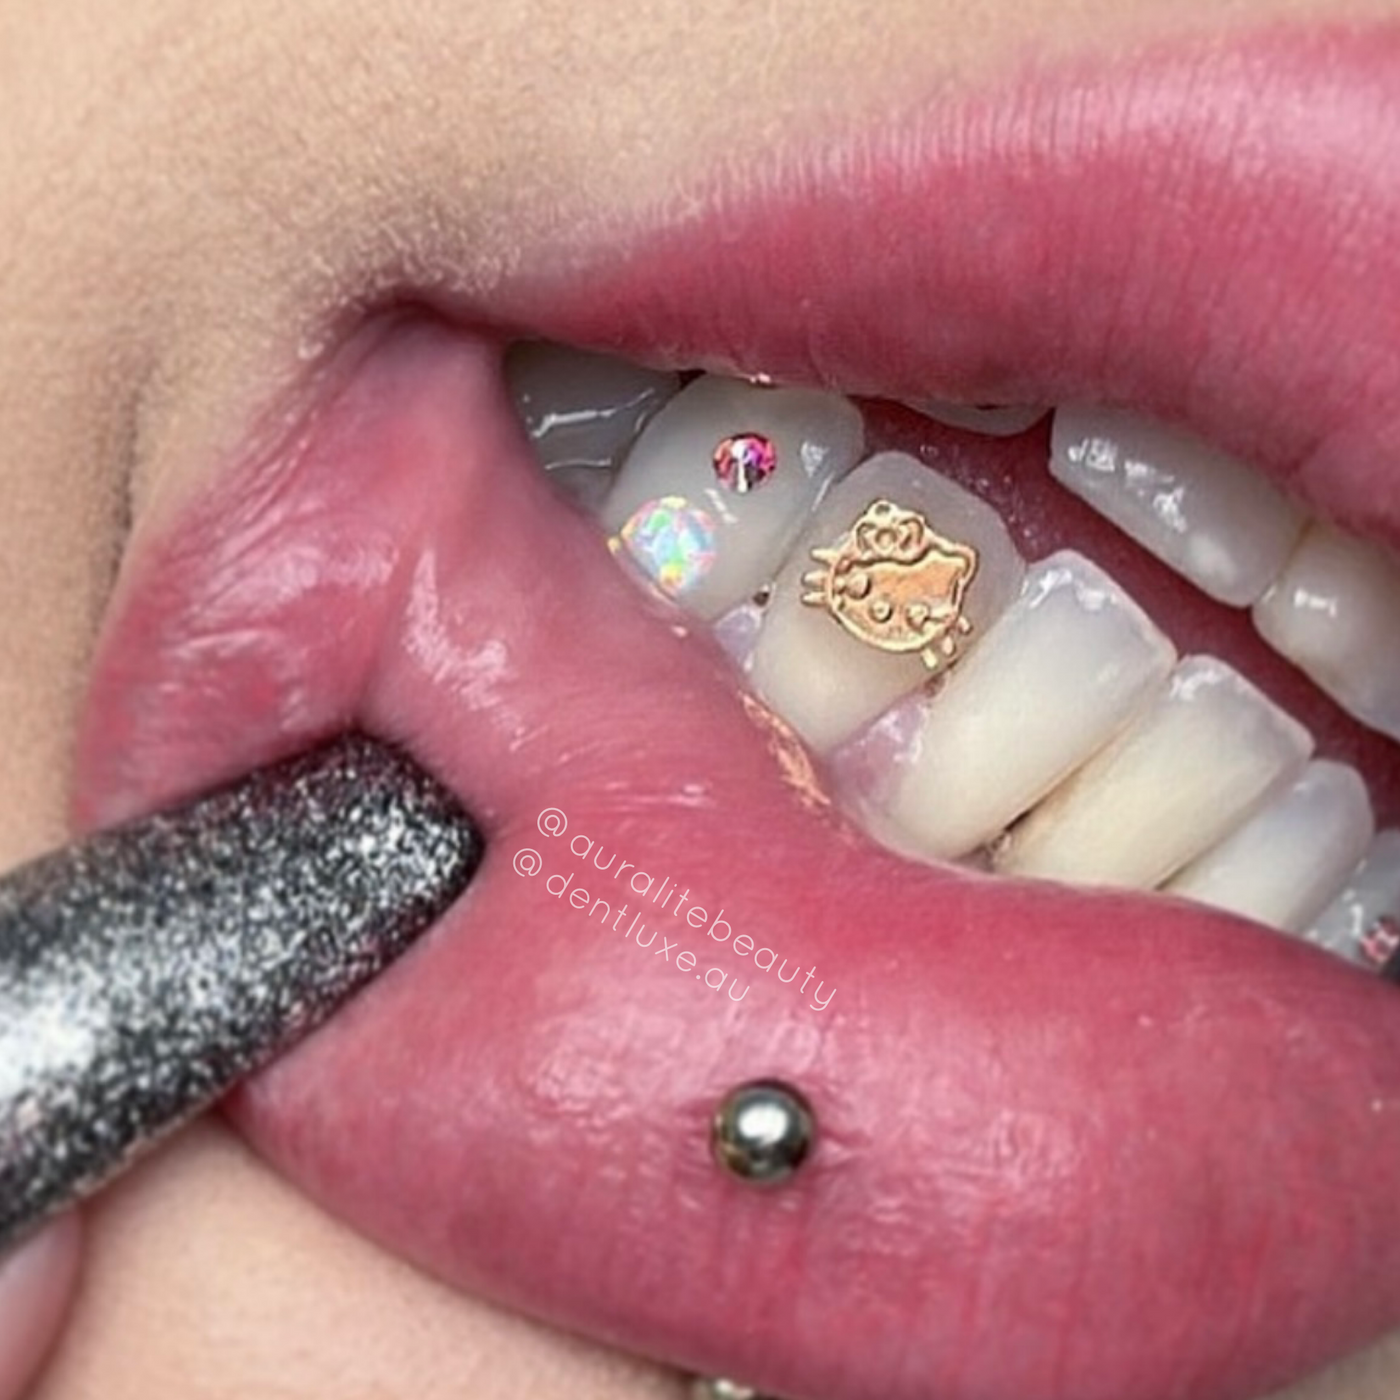 18k Gold Tooth Gem HELLO KITTY